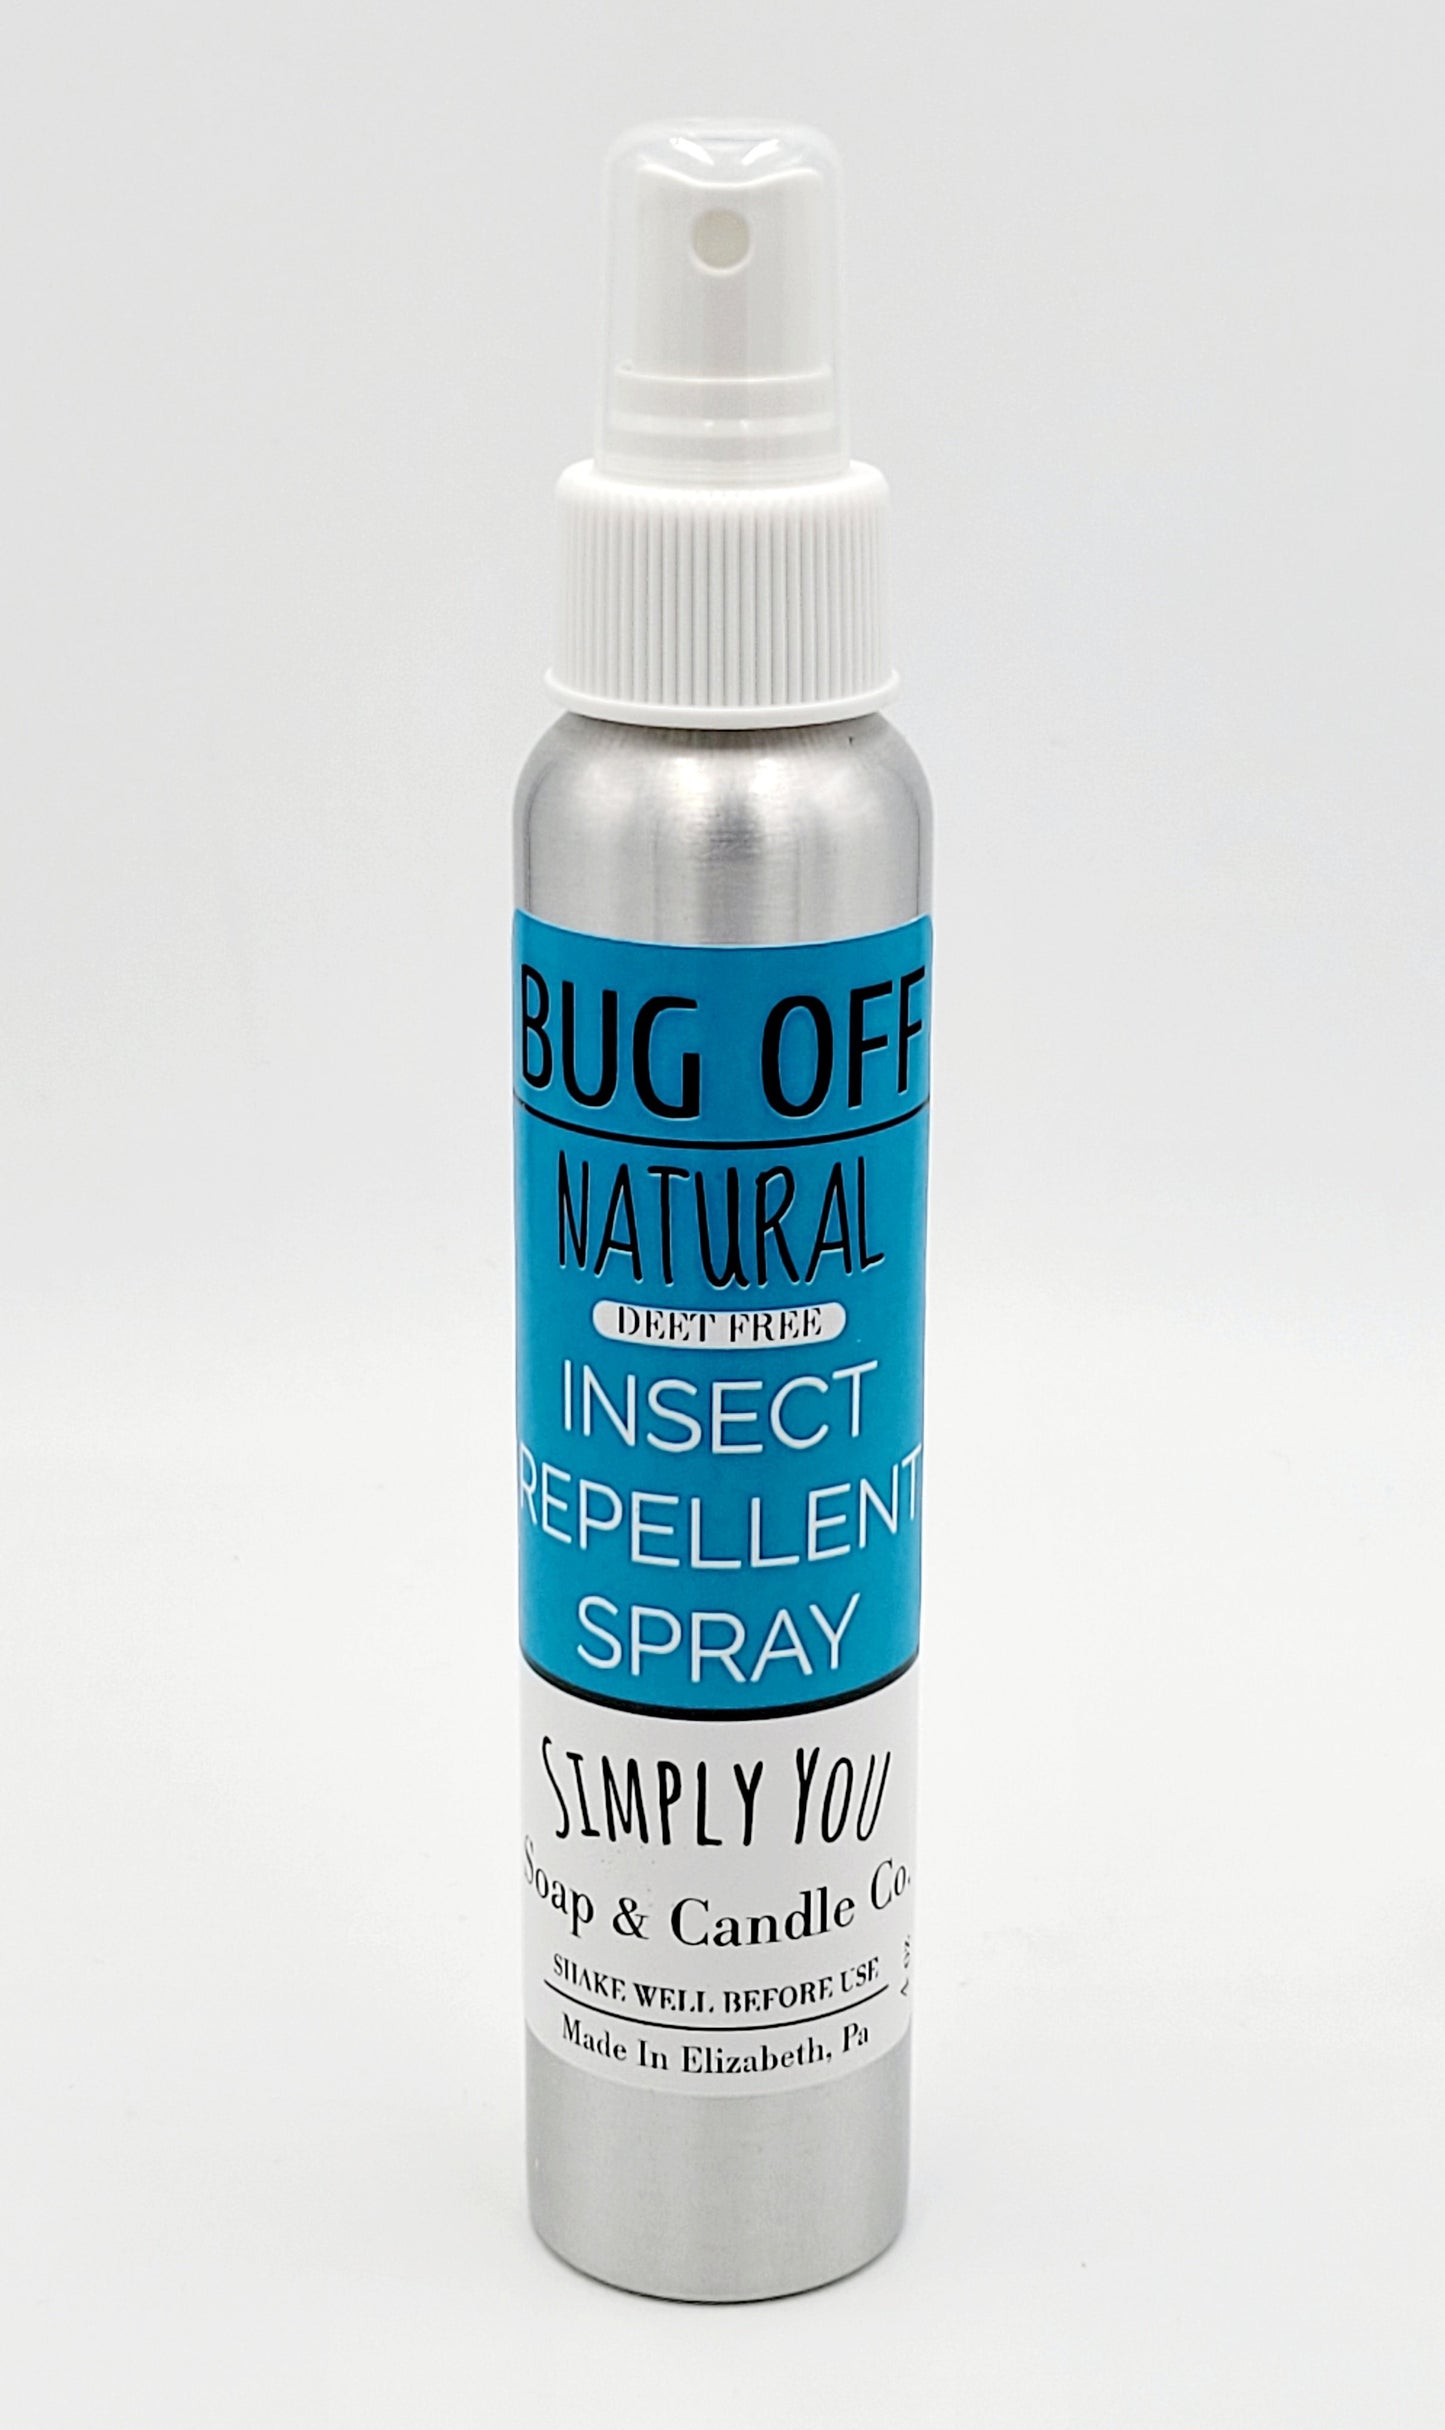 Bug Off Natural Insect Repellent